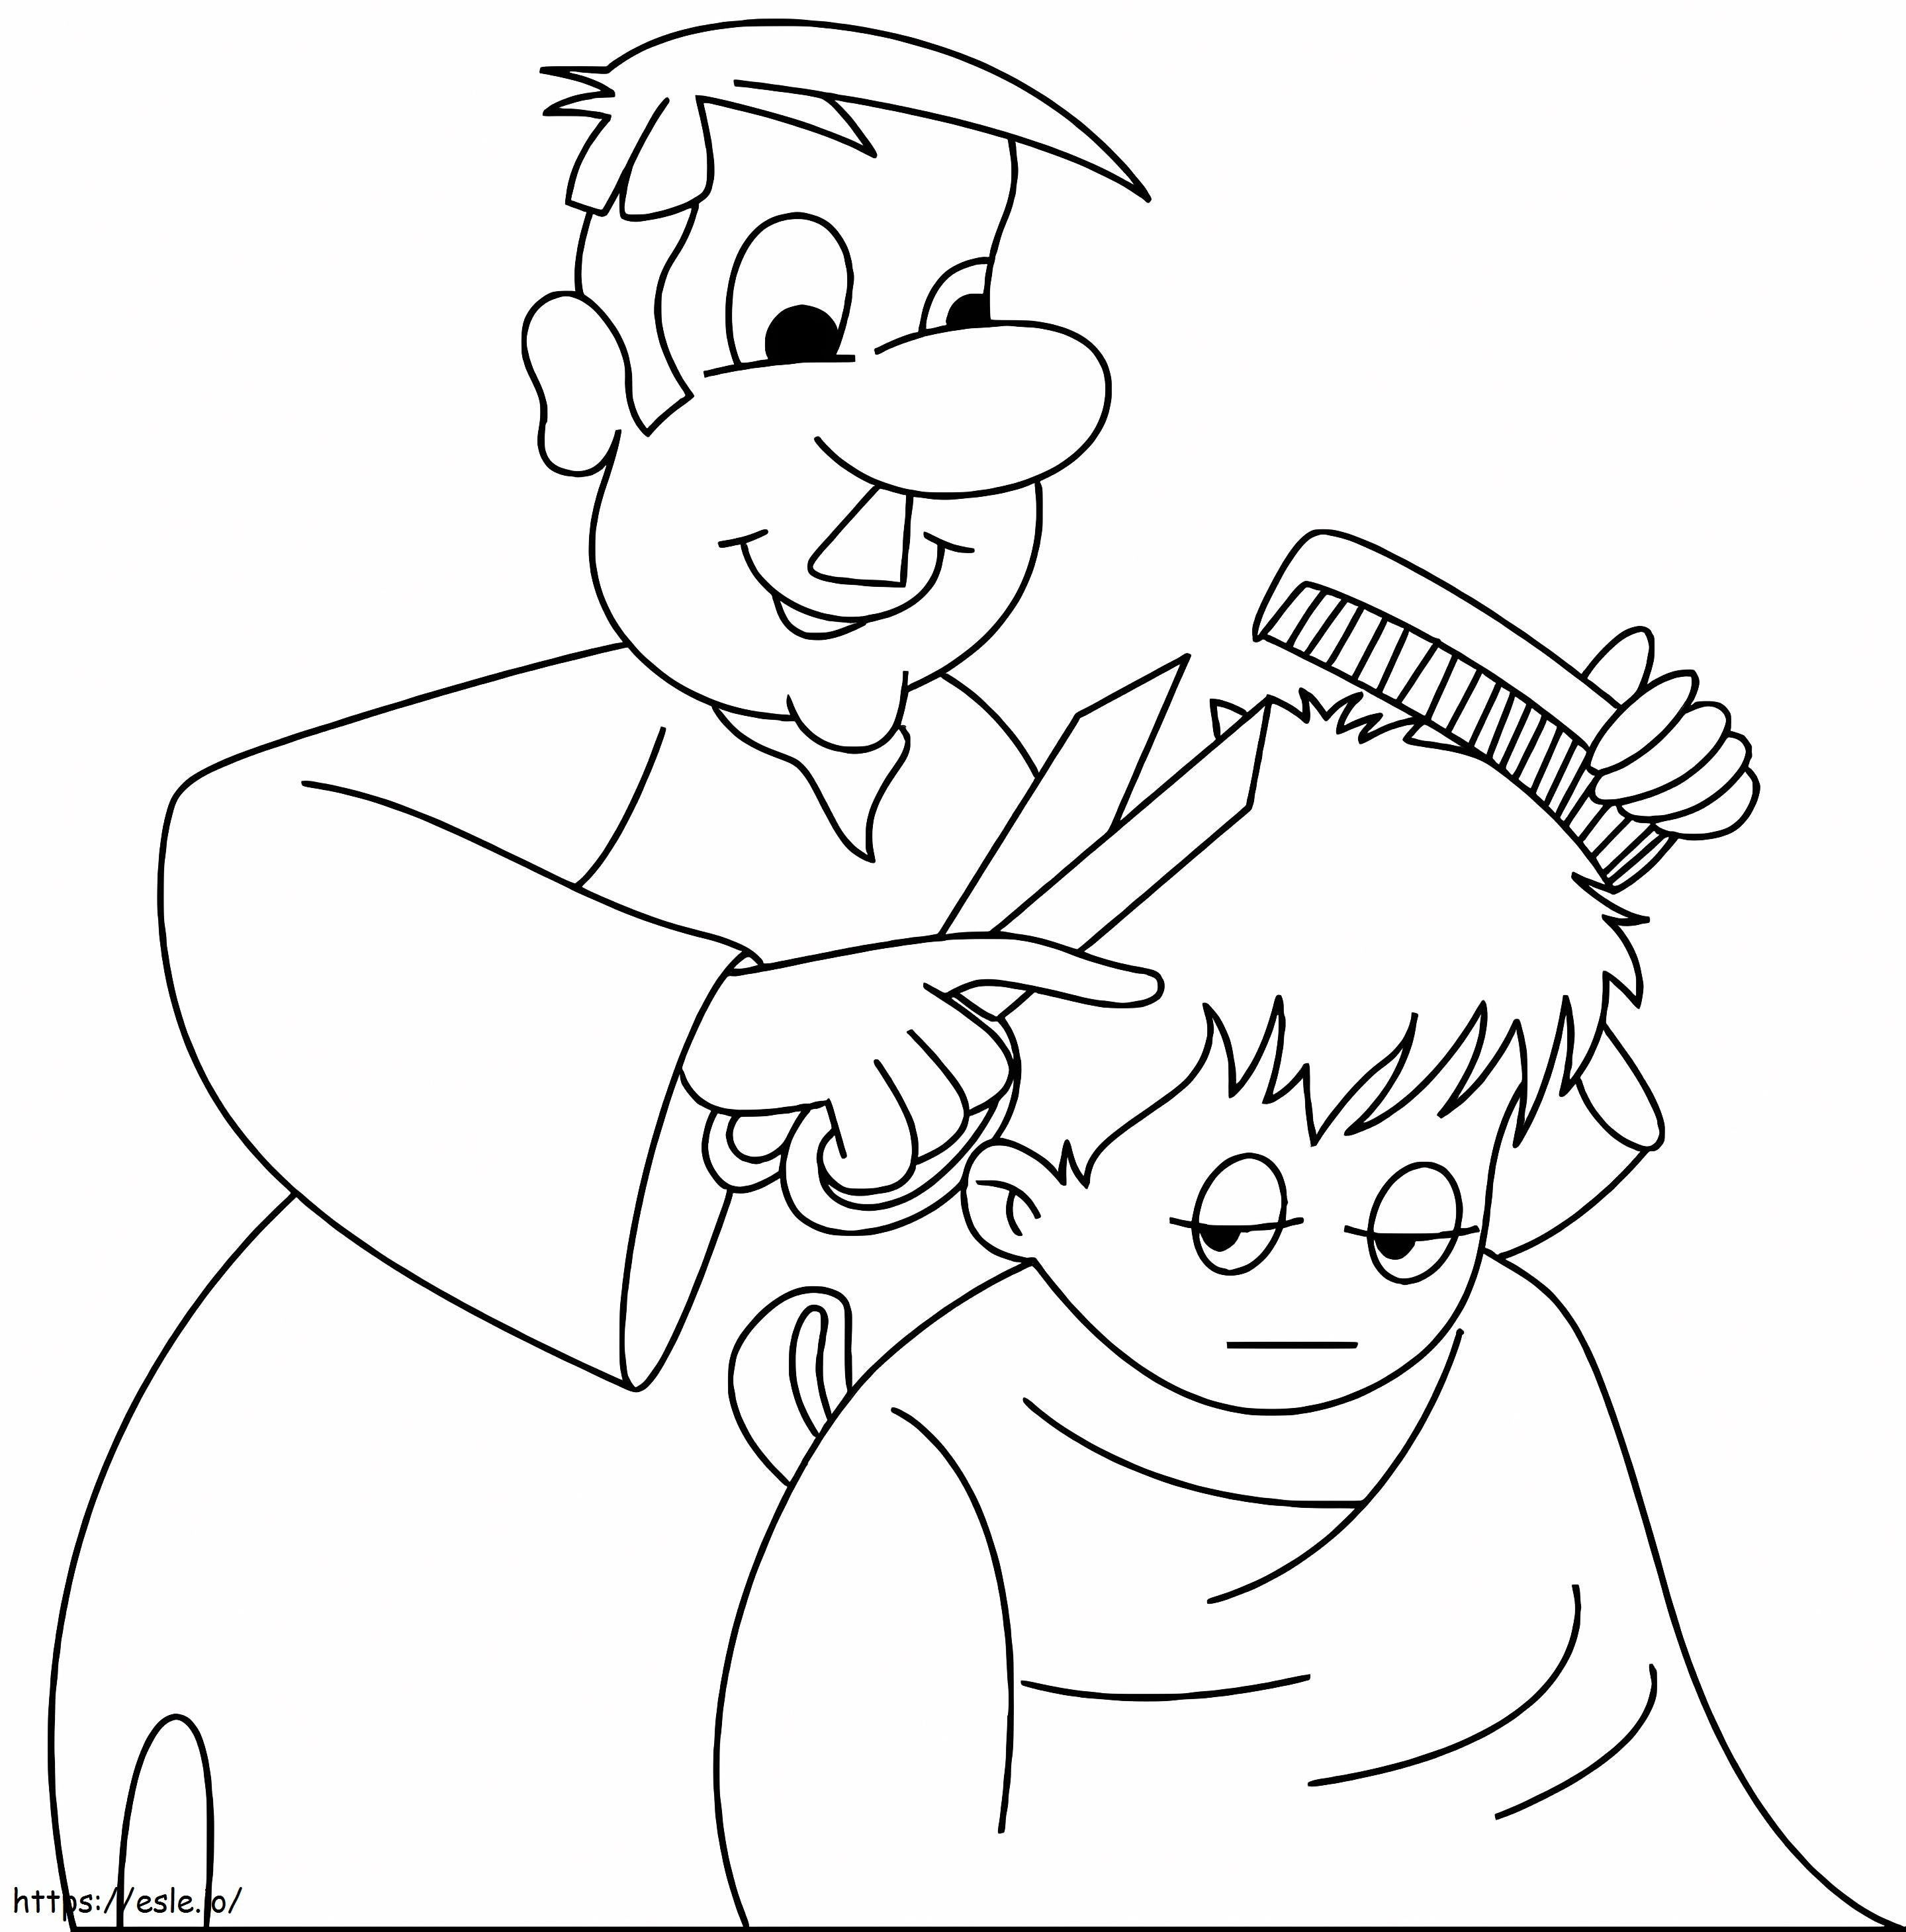 Happy Barber coloring page